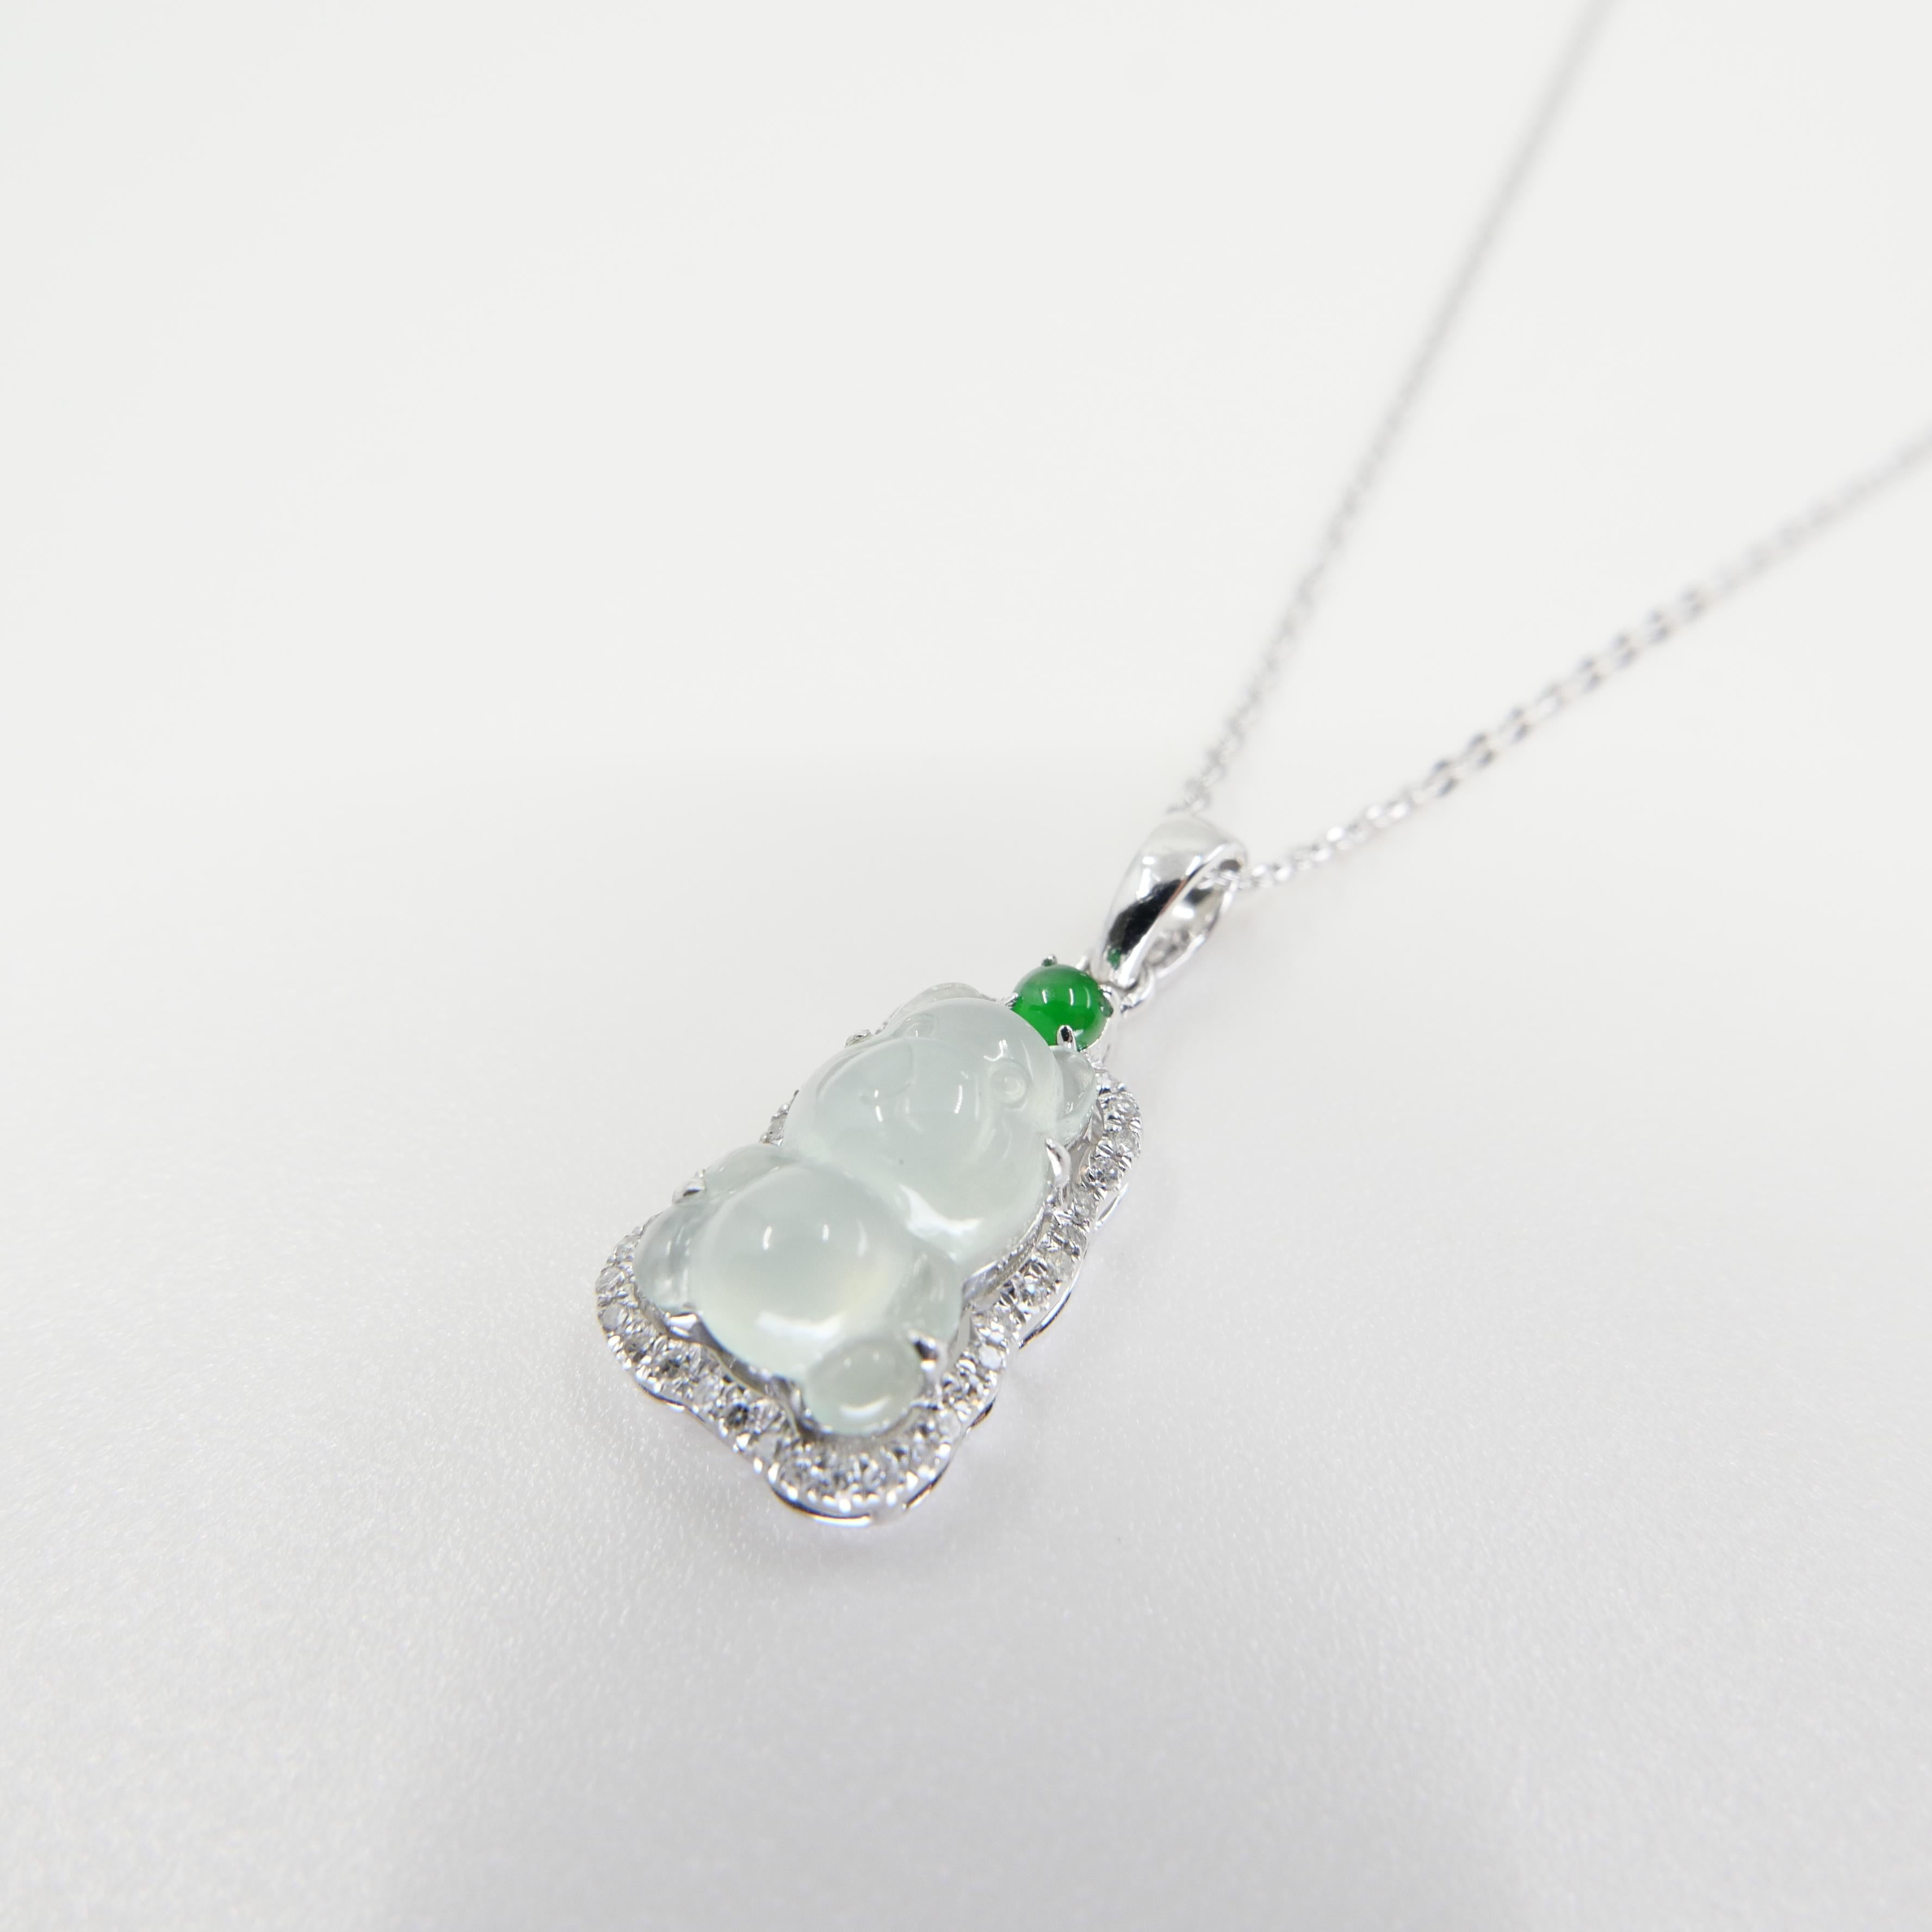 Certified Imperial & Icy Jade Diamond Gummy Bear Pendant, Cuteness Overload For Sale 4